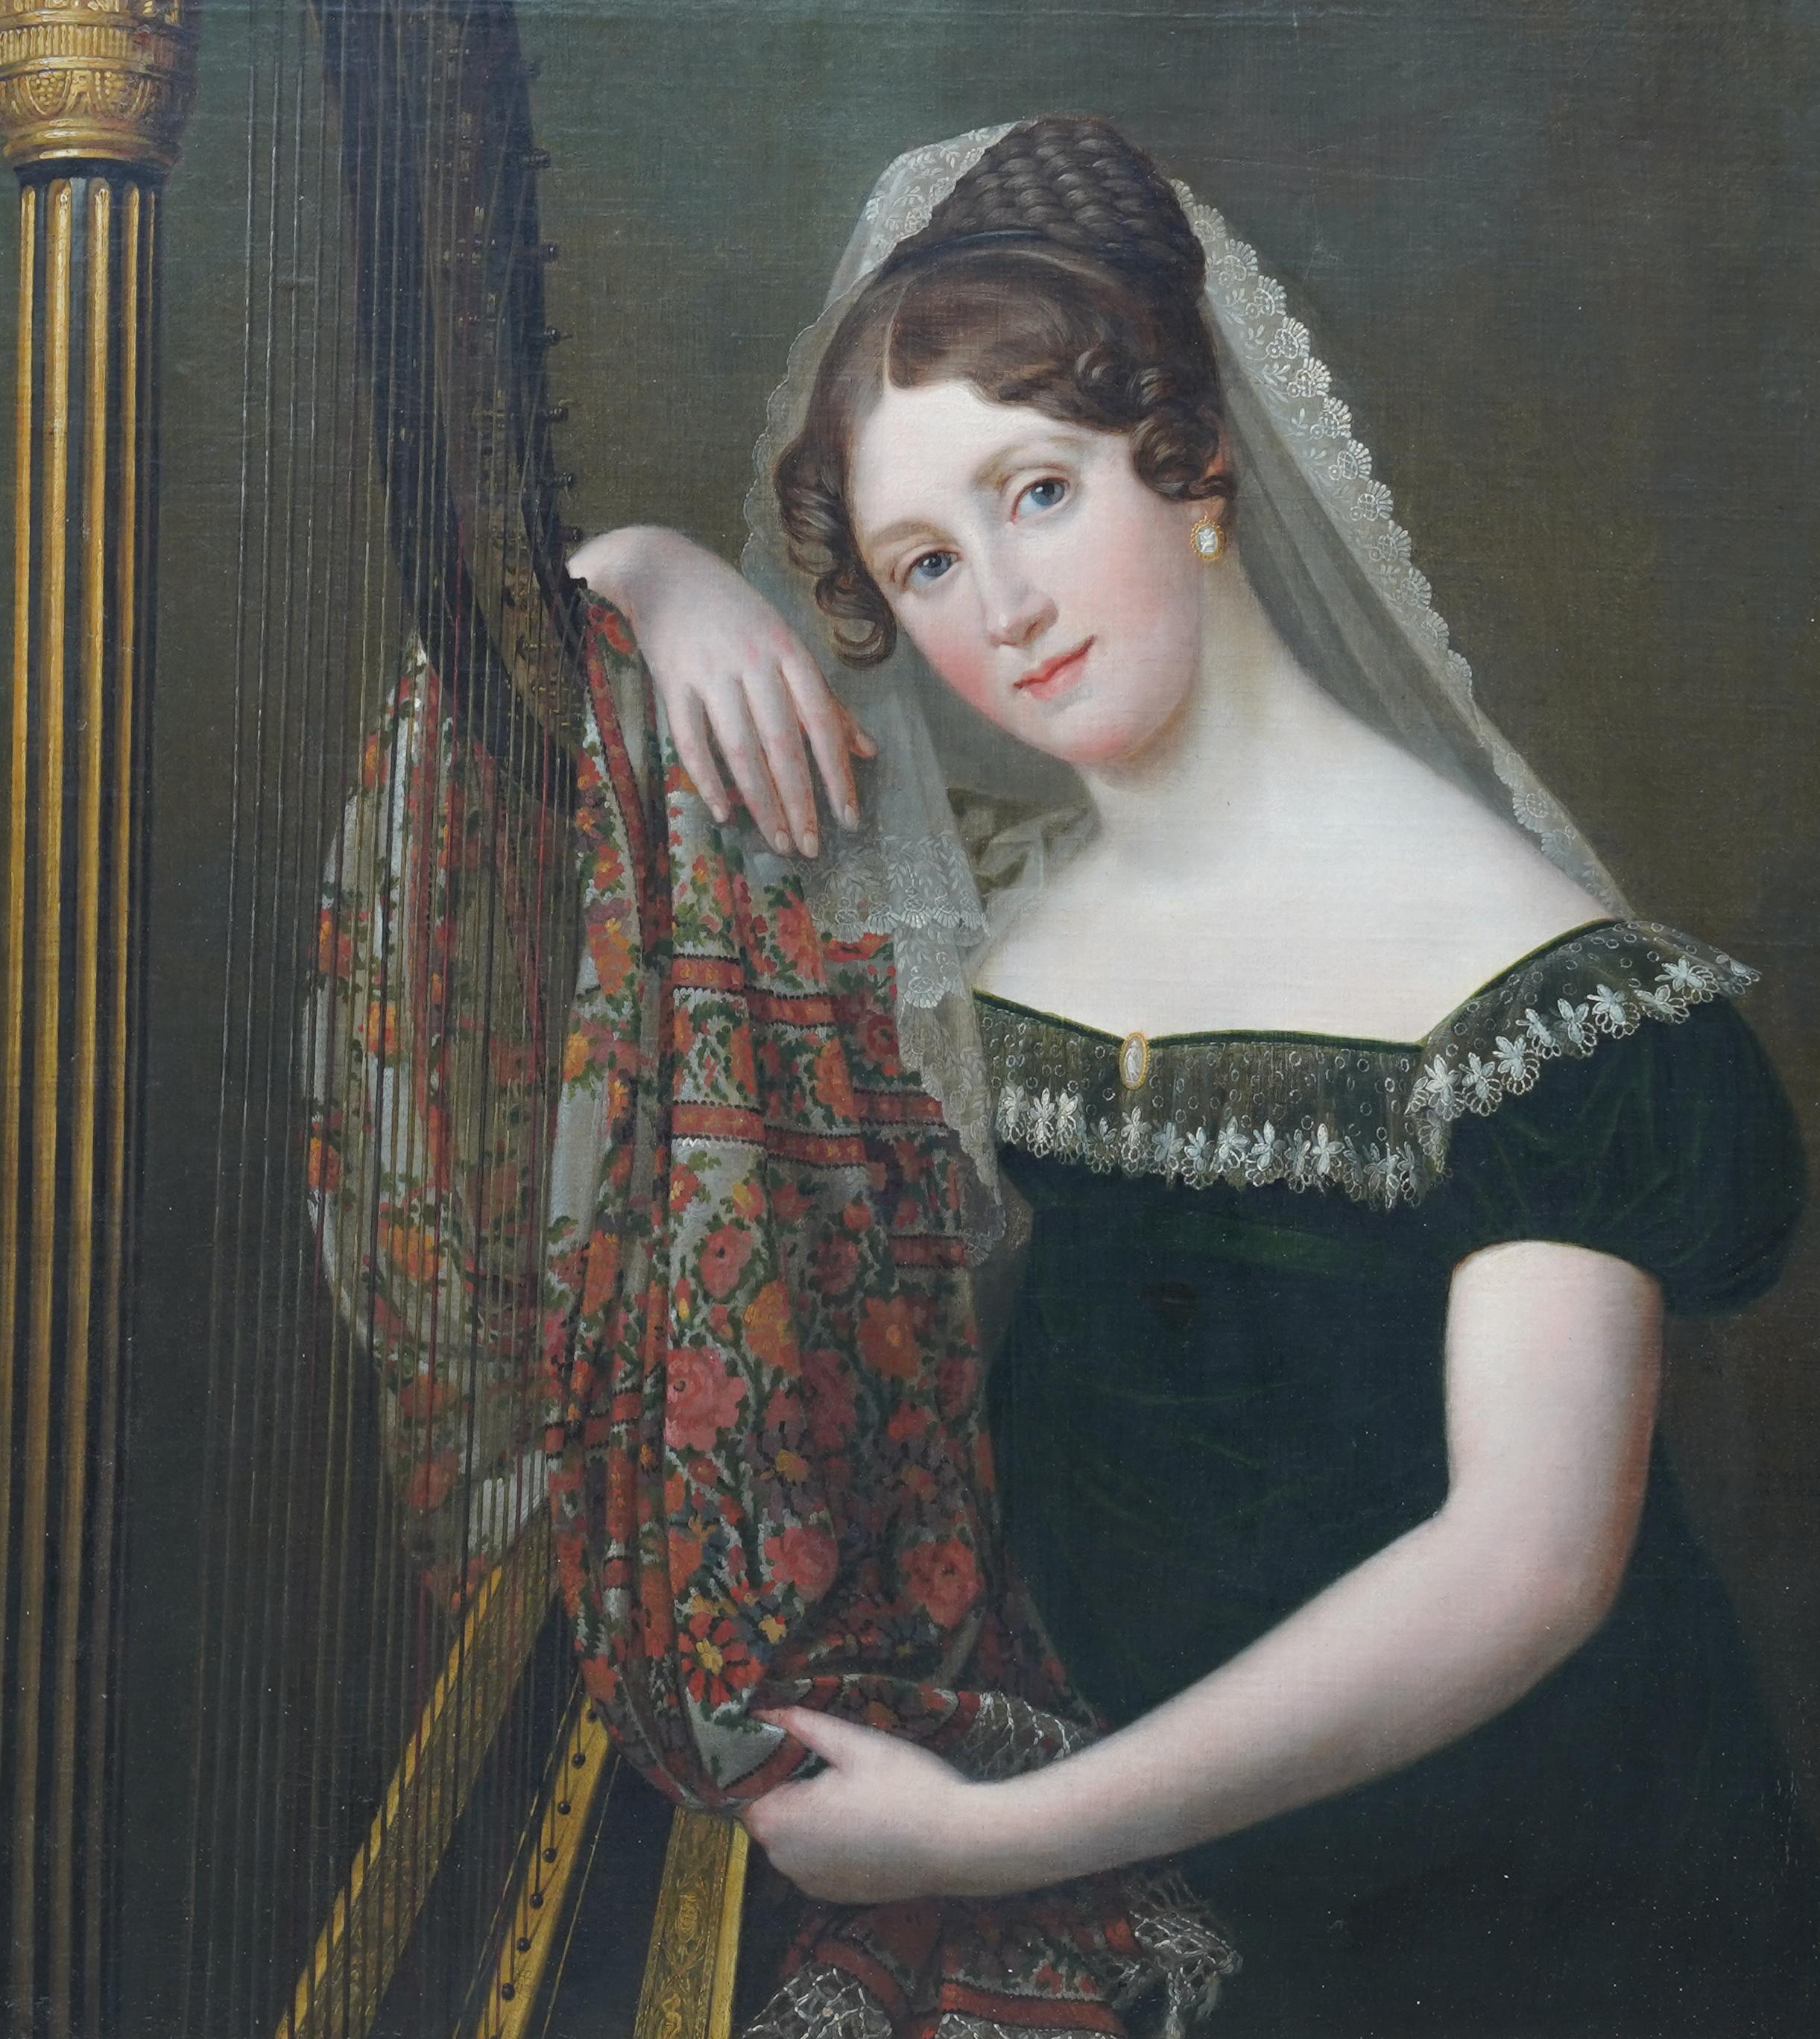 Portrait of a harpist - Belgian Old Master musical art oil painting harp player - Painting by Jan Baptiste Lodewijk Maes